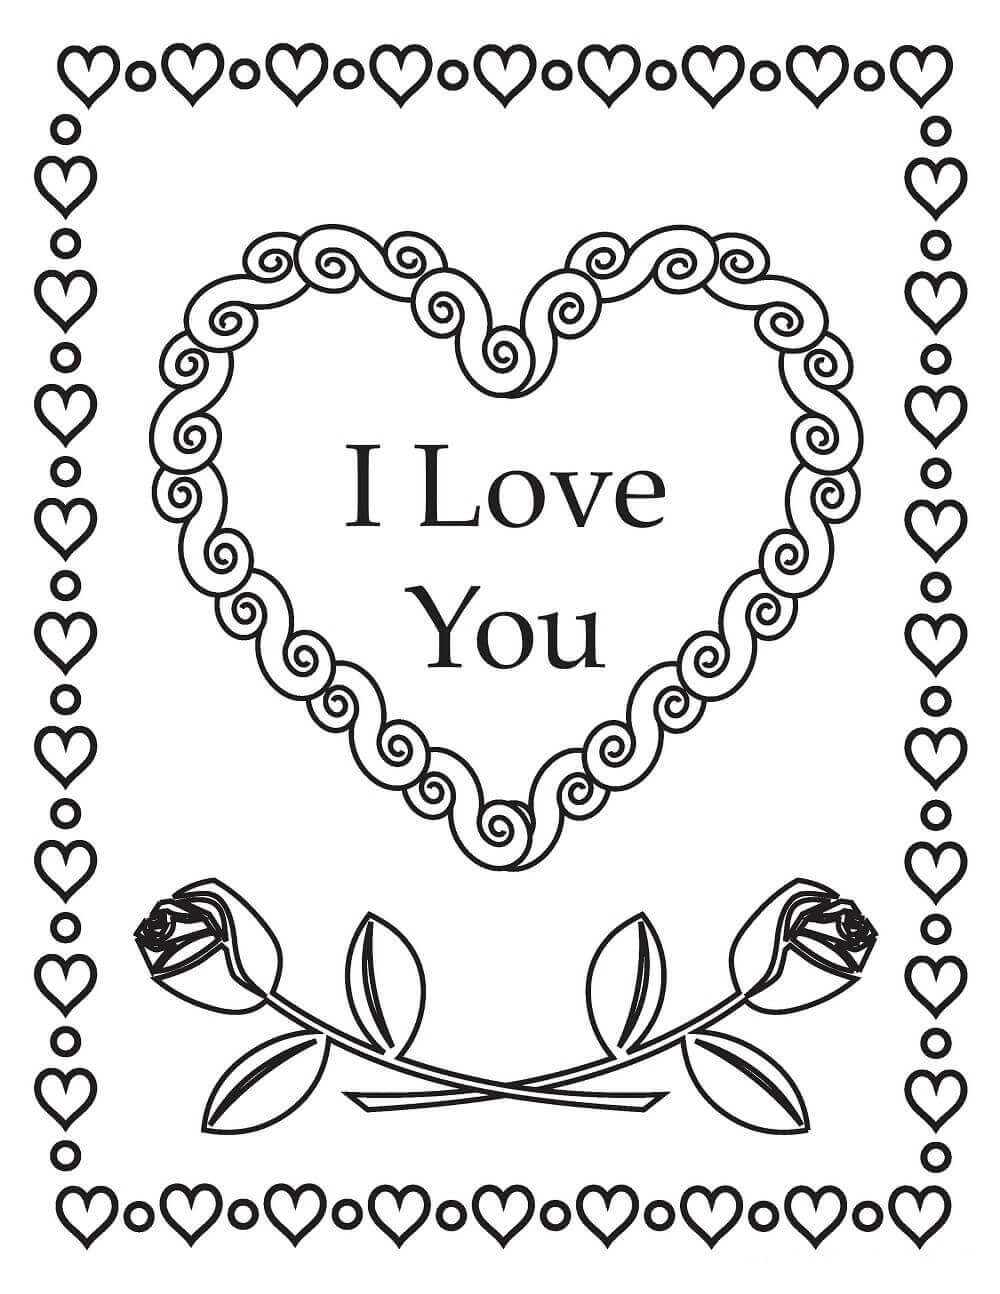 Free printable Valentines Day Card Coloring Pages